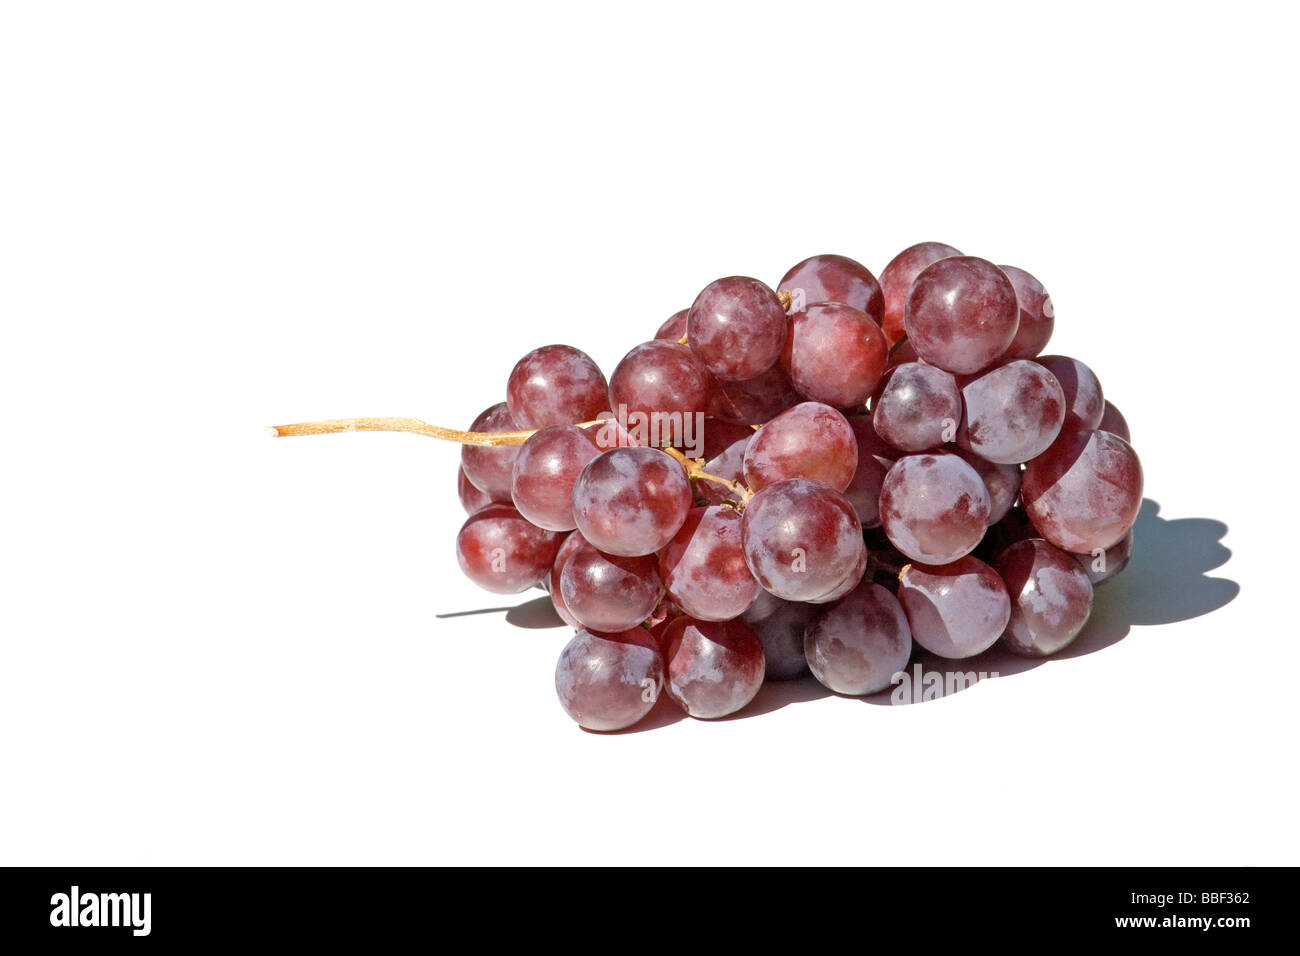 Cluster of red grapes Stock Photo